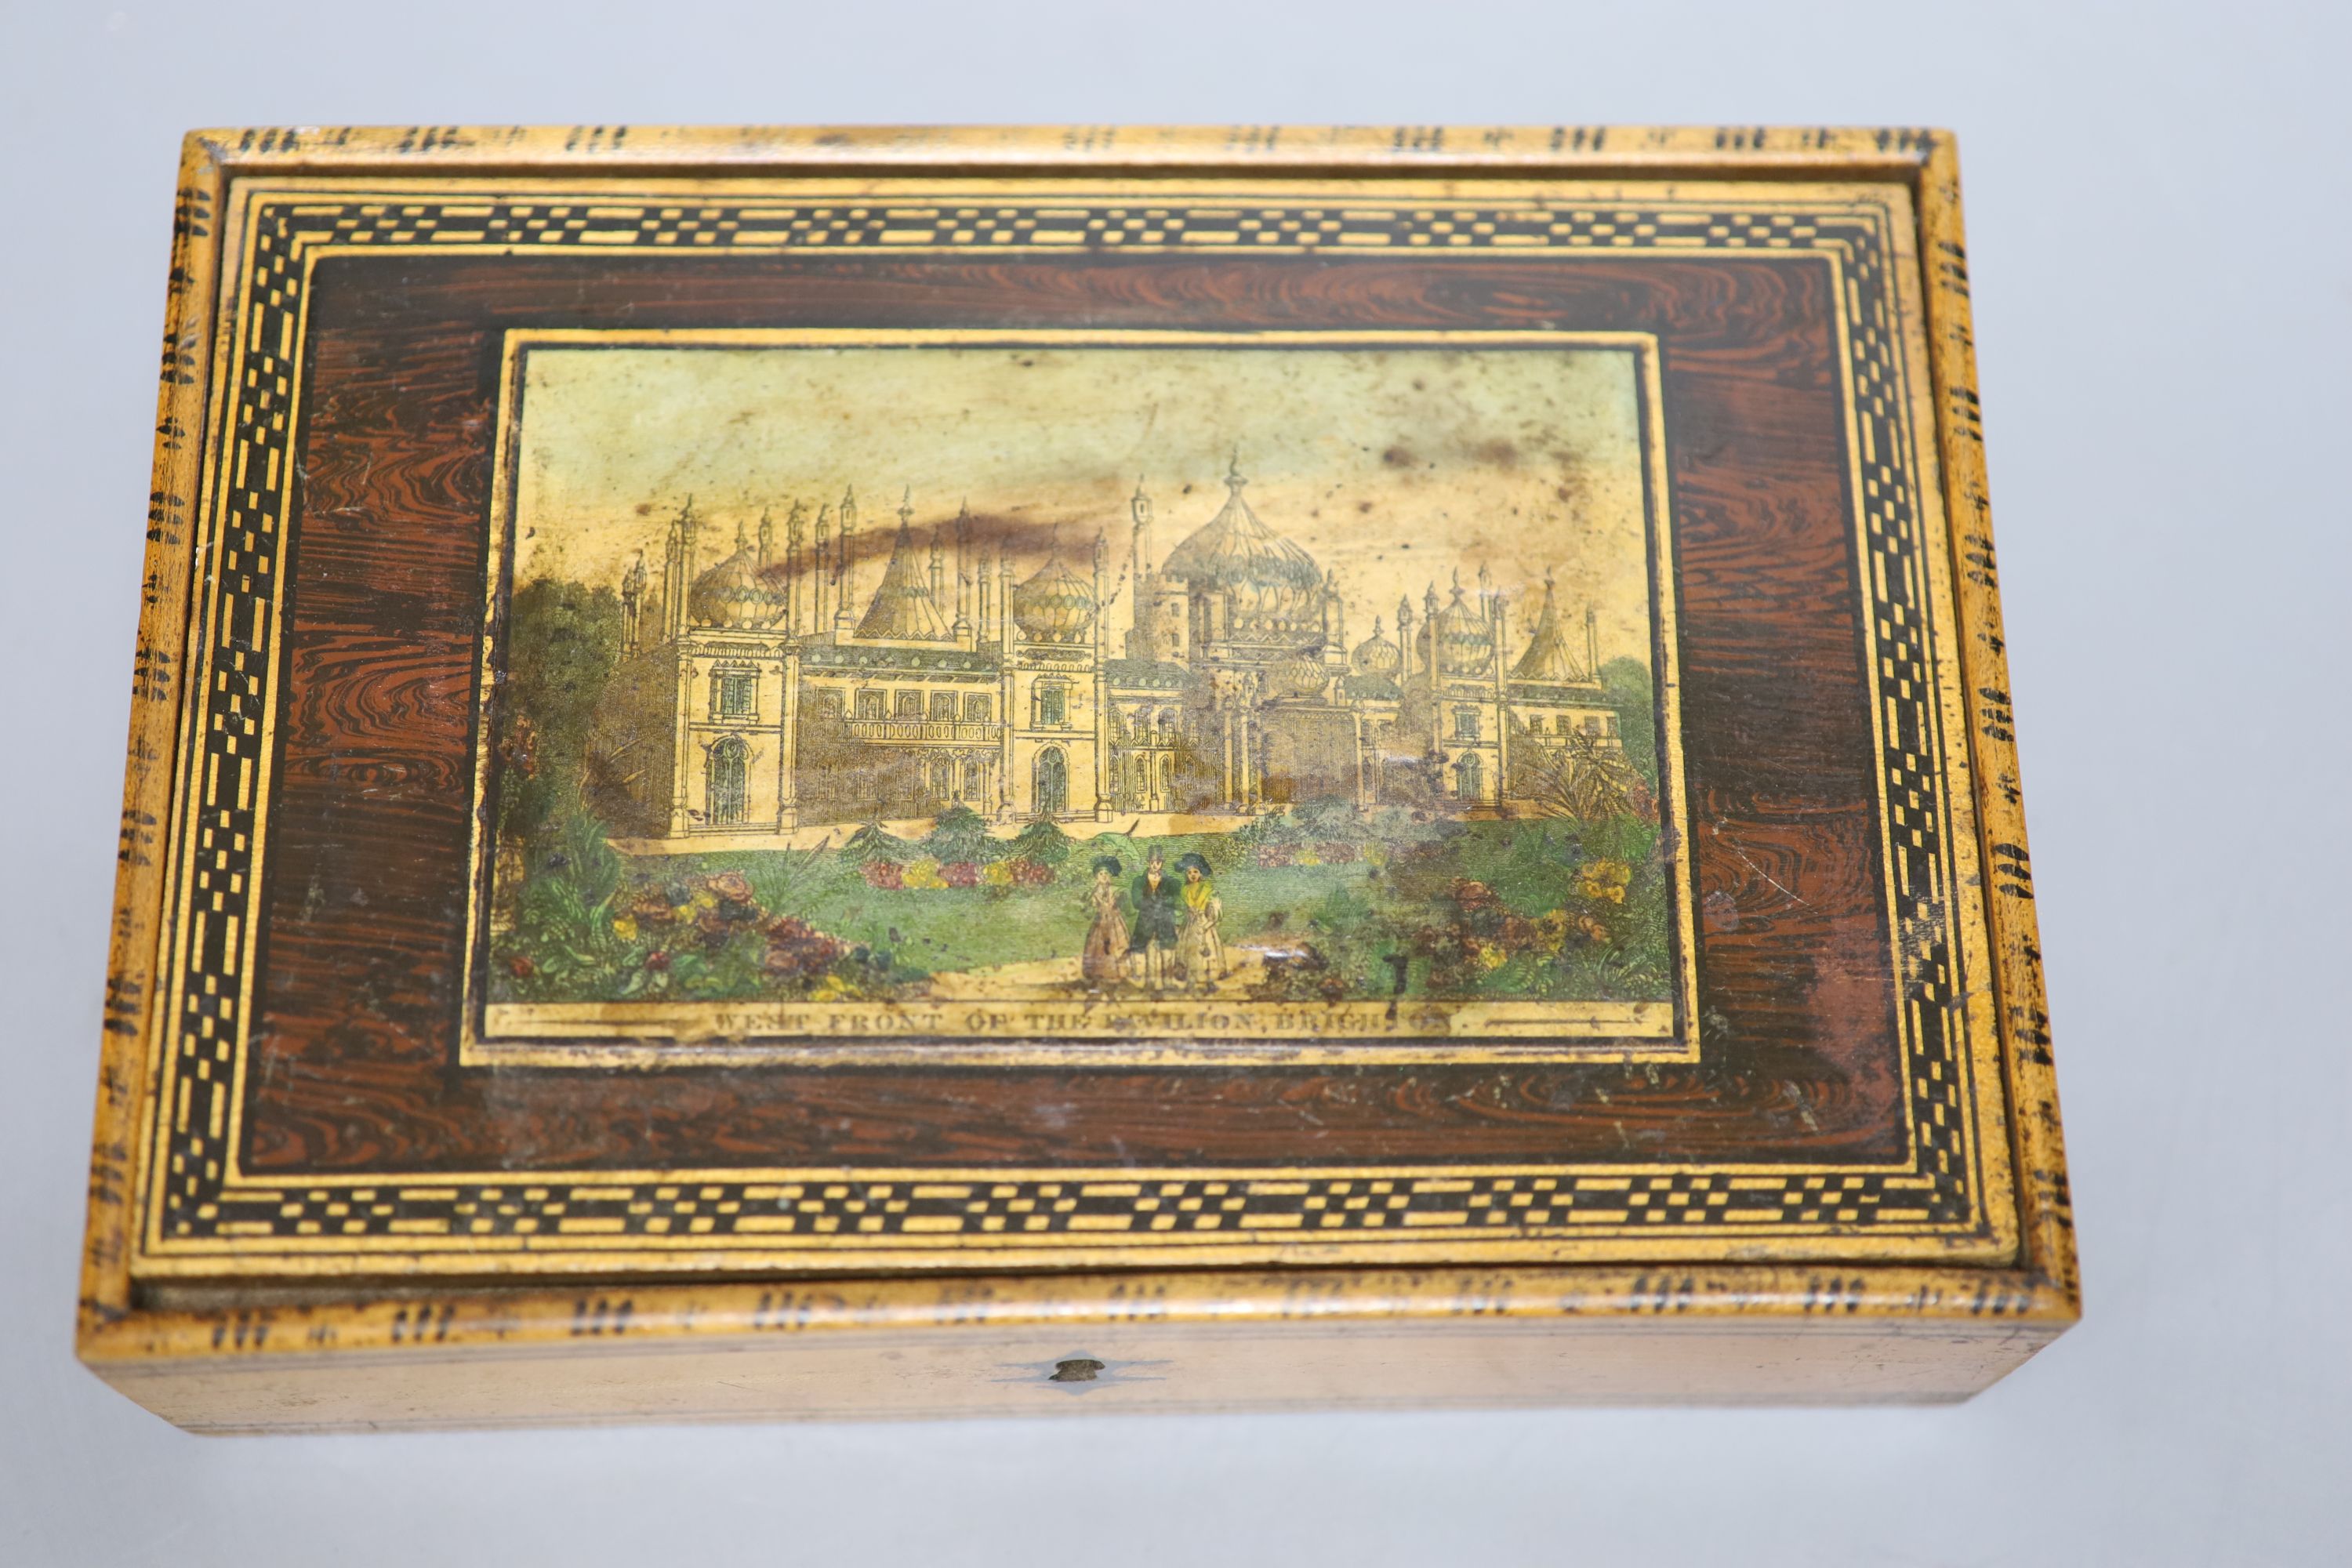 An early Tunbridge ware 'West Front of the Pavilion Brighton' sycamore box, probably Wise, c.1820, 22cm